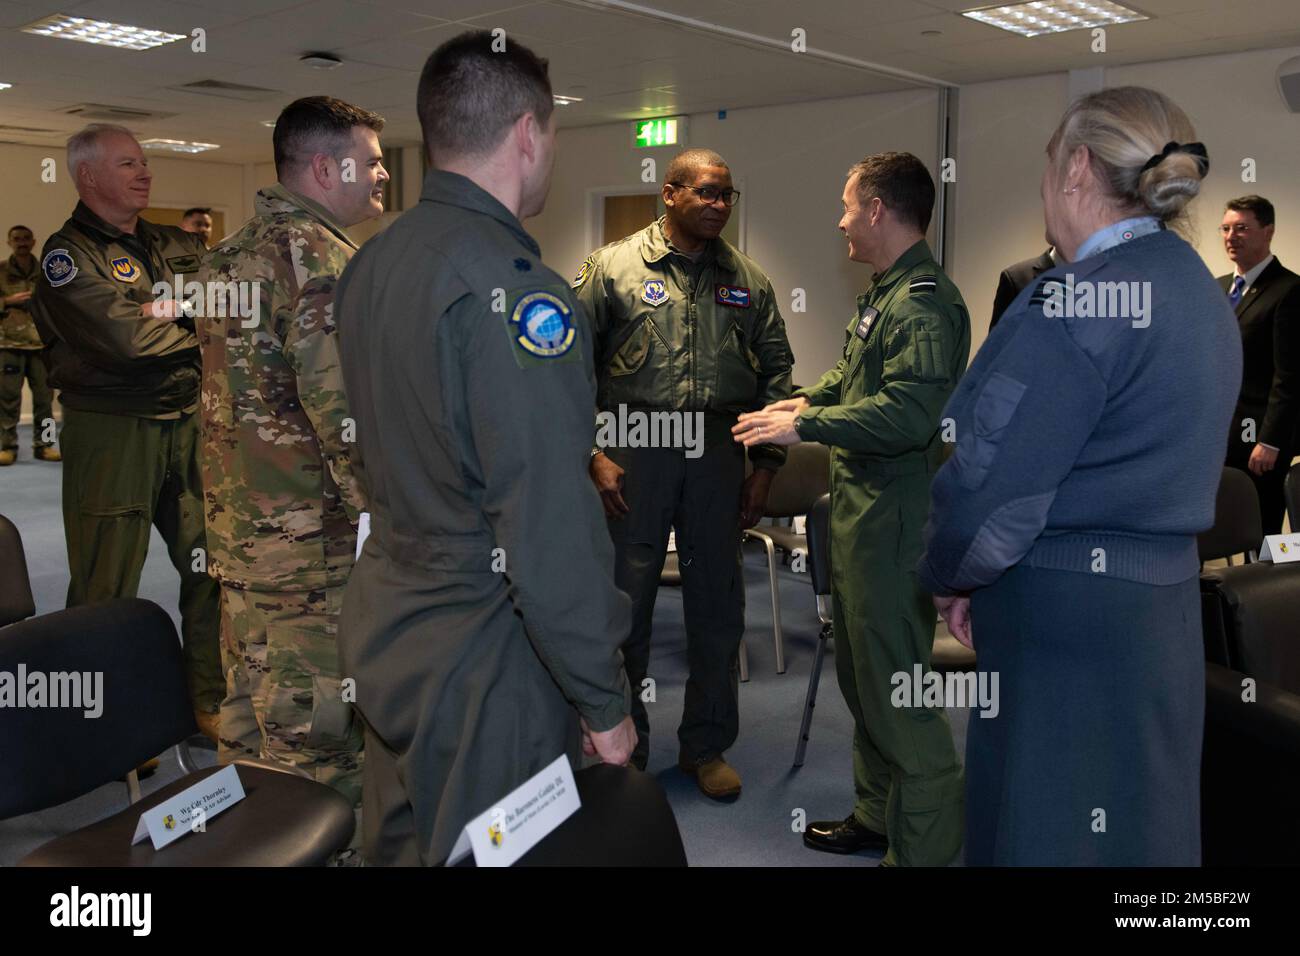 U.S. Air Force Maj. Gen. Randall Reed, center left, Third Air Force commander, greets Royal Air Force Air Vice-Marshall Phil Robinson CBE DFC, center right, Air Officer Commanding No. 11 Group, at RAF Fairford, England, Feb. 21, 2022. Reed was at Fairford to participate in briefings with representatives from allied nations about the capabilities and operations of U.S. Air Forces in the United Kingdom. Stock Photo